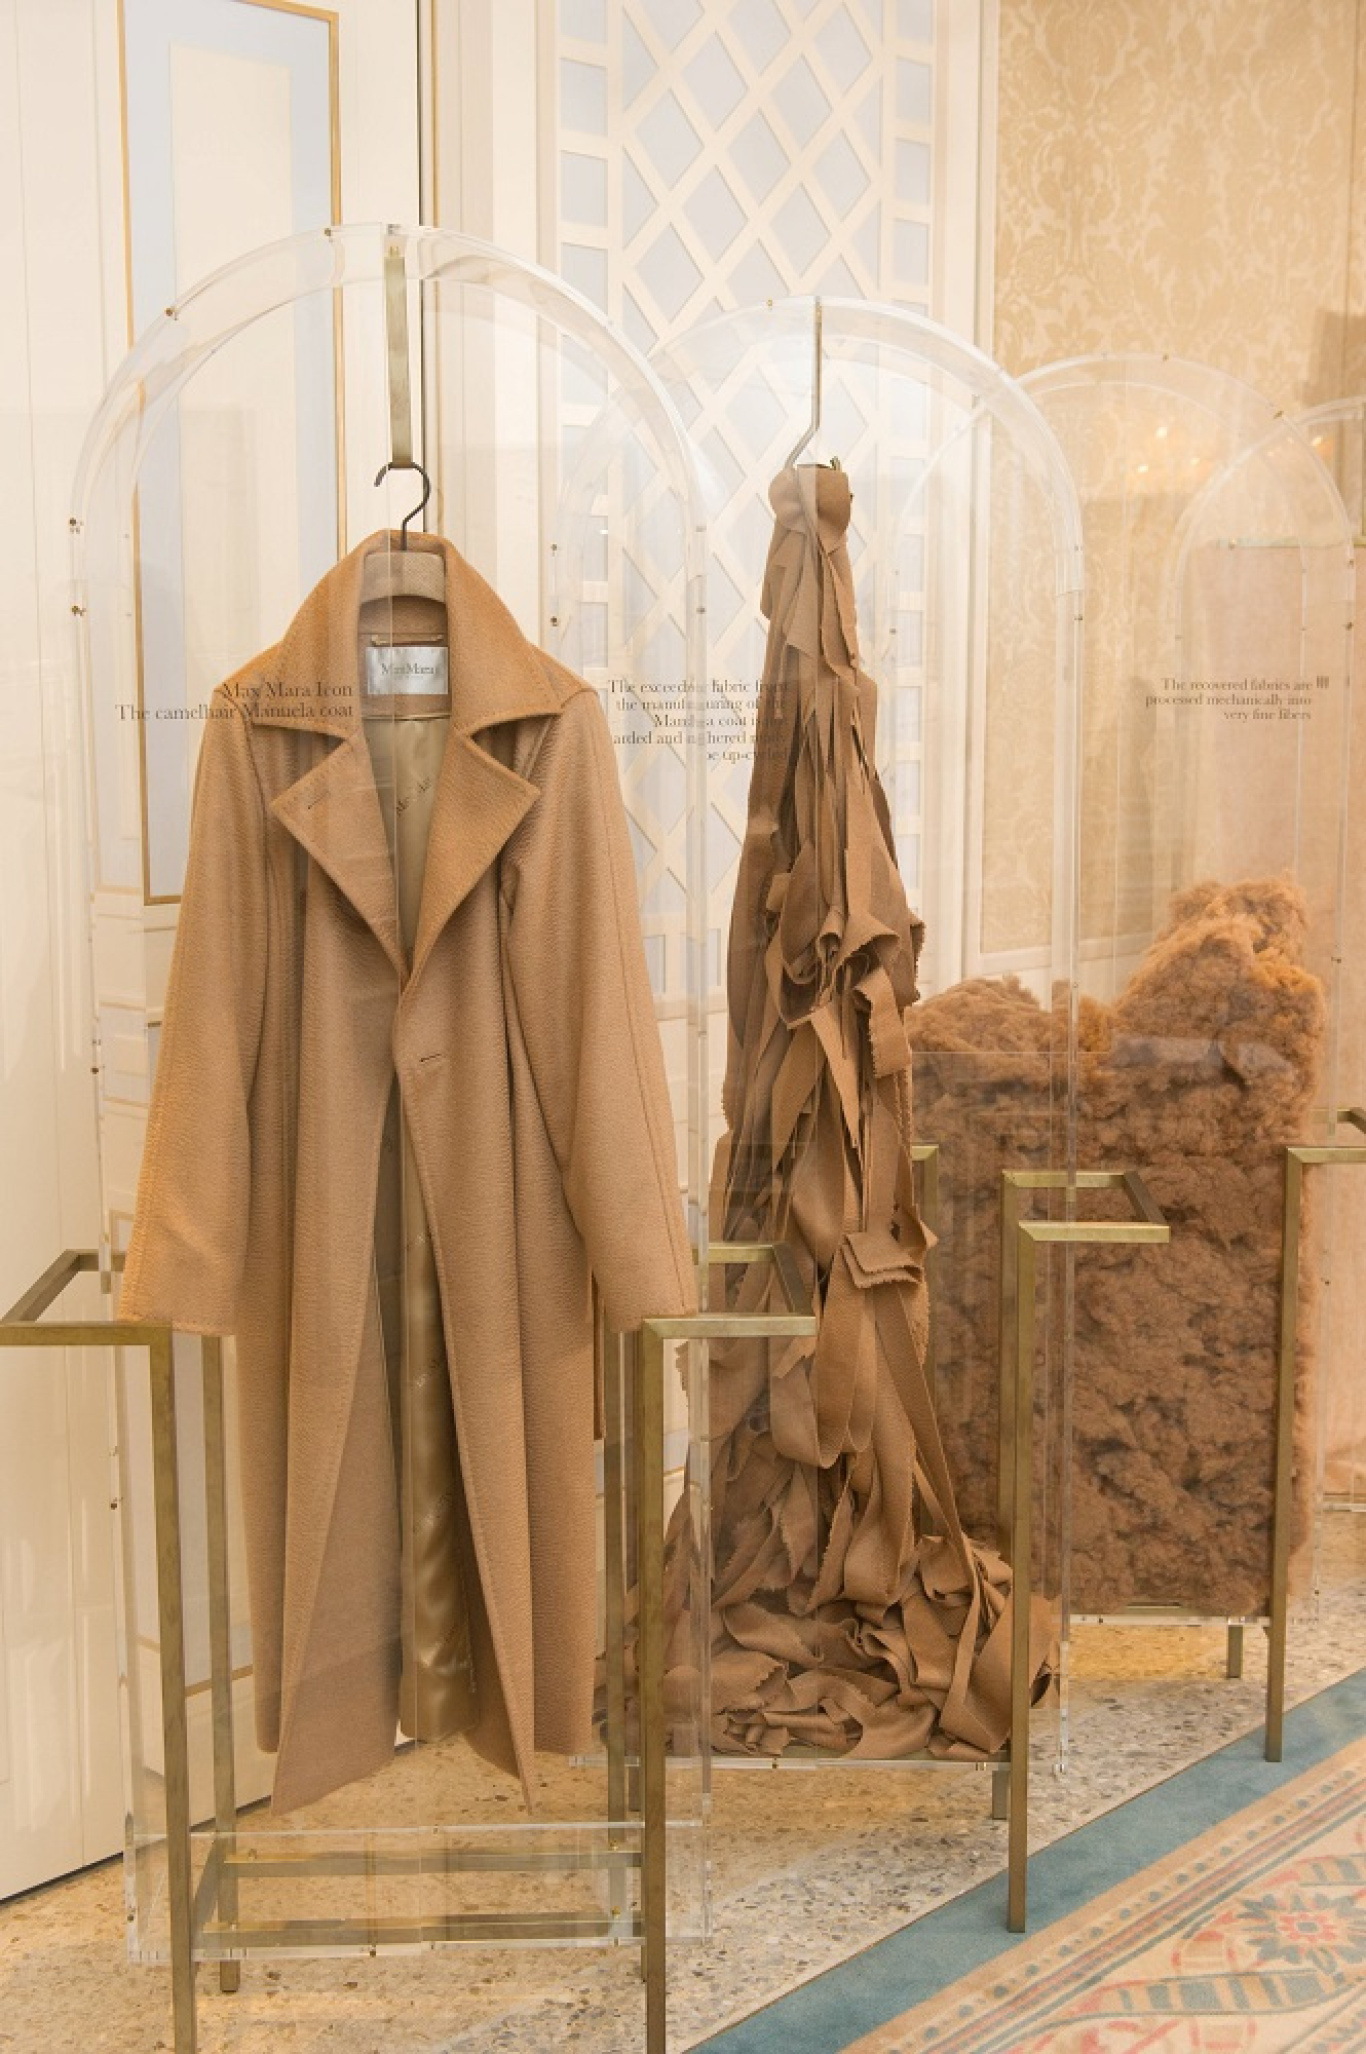 Max Mara inroduces CameLux at the occasion of the Roundtable on Sustainability